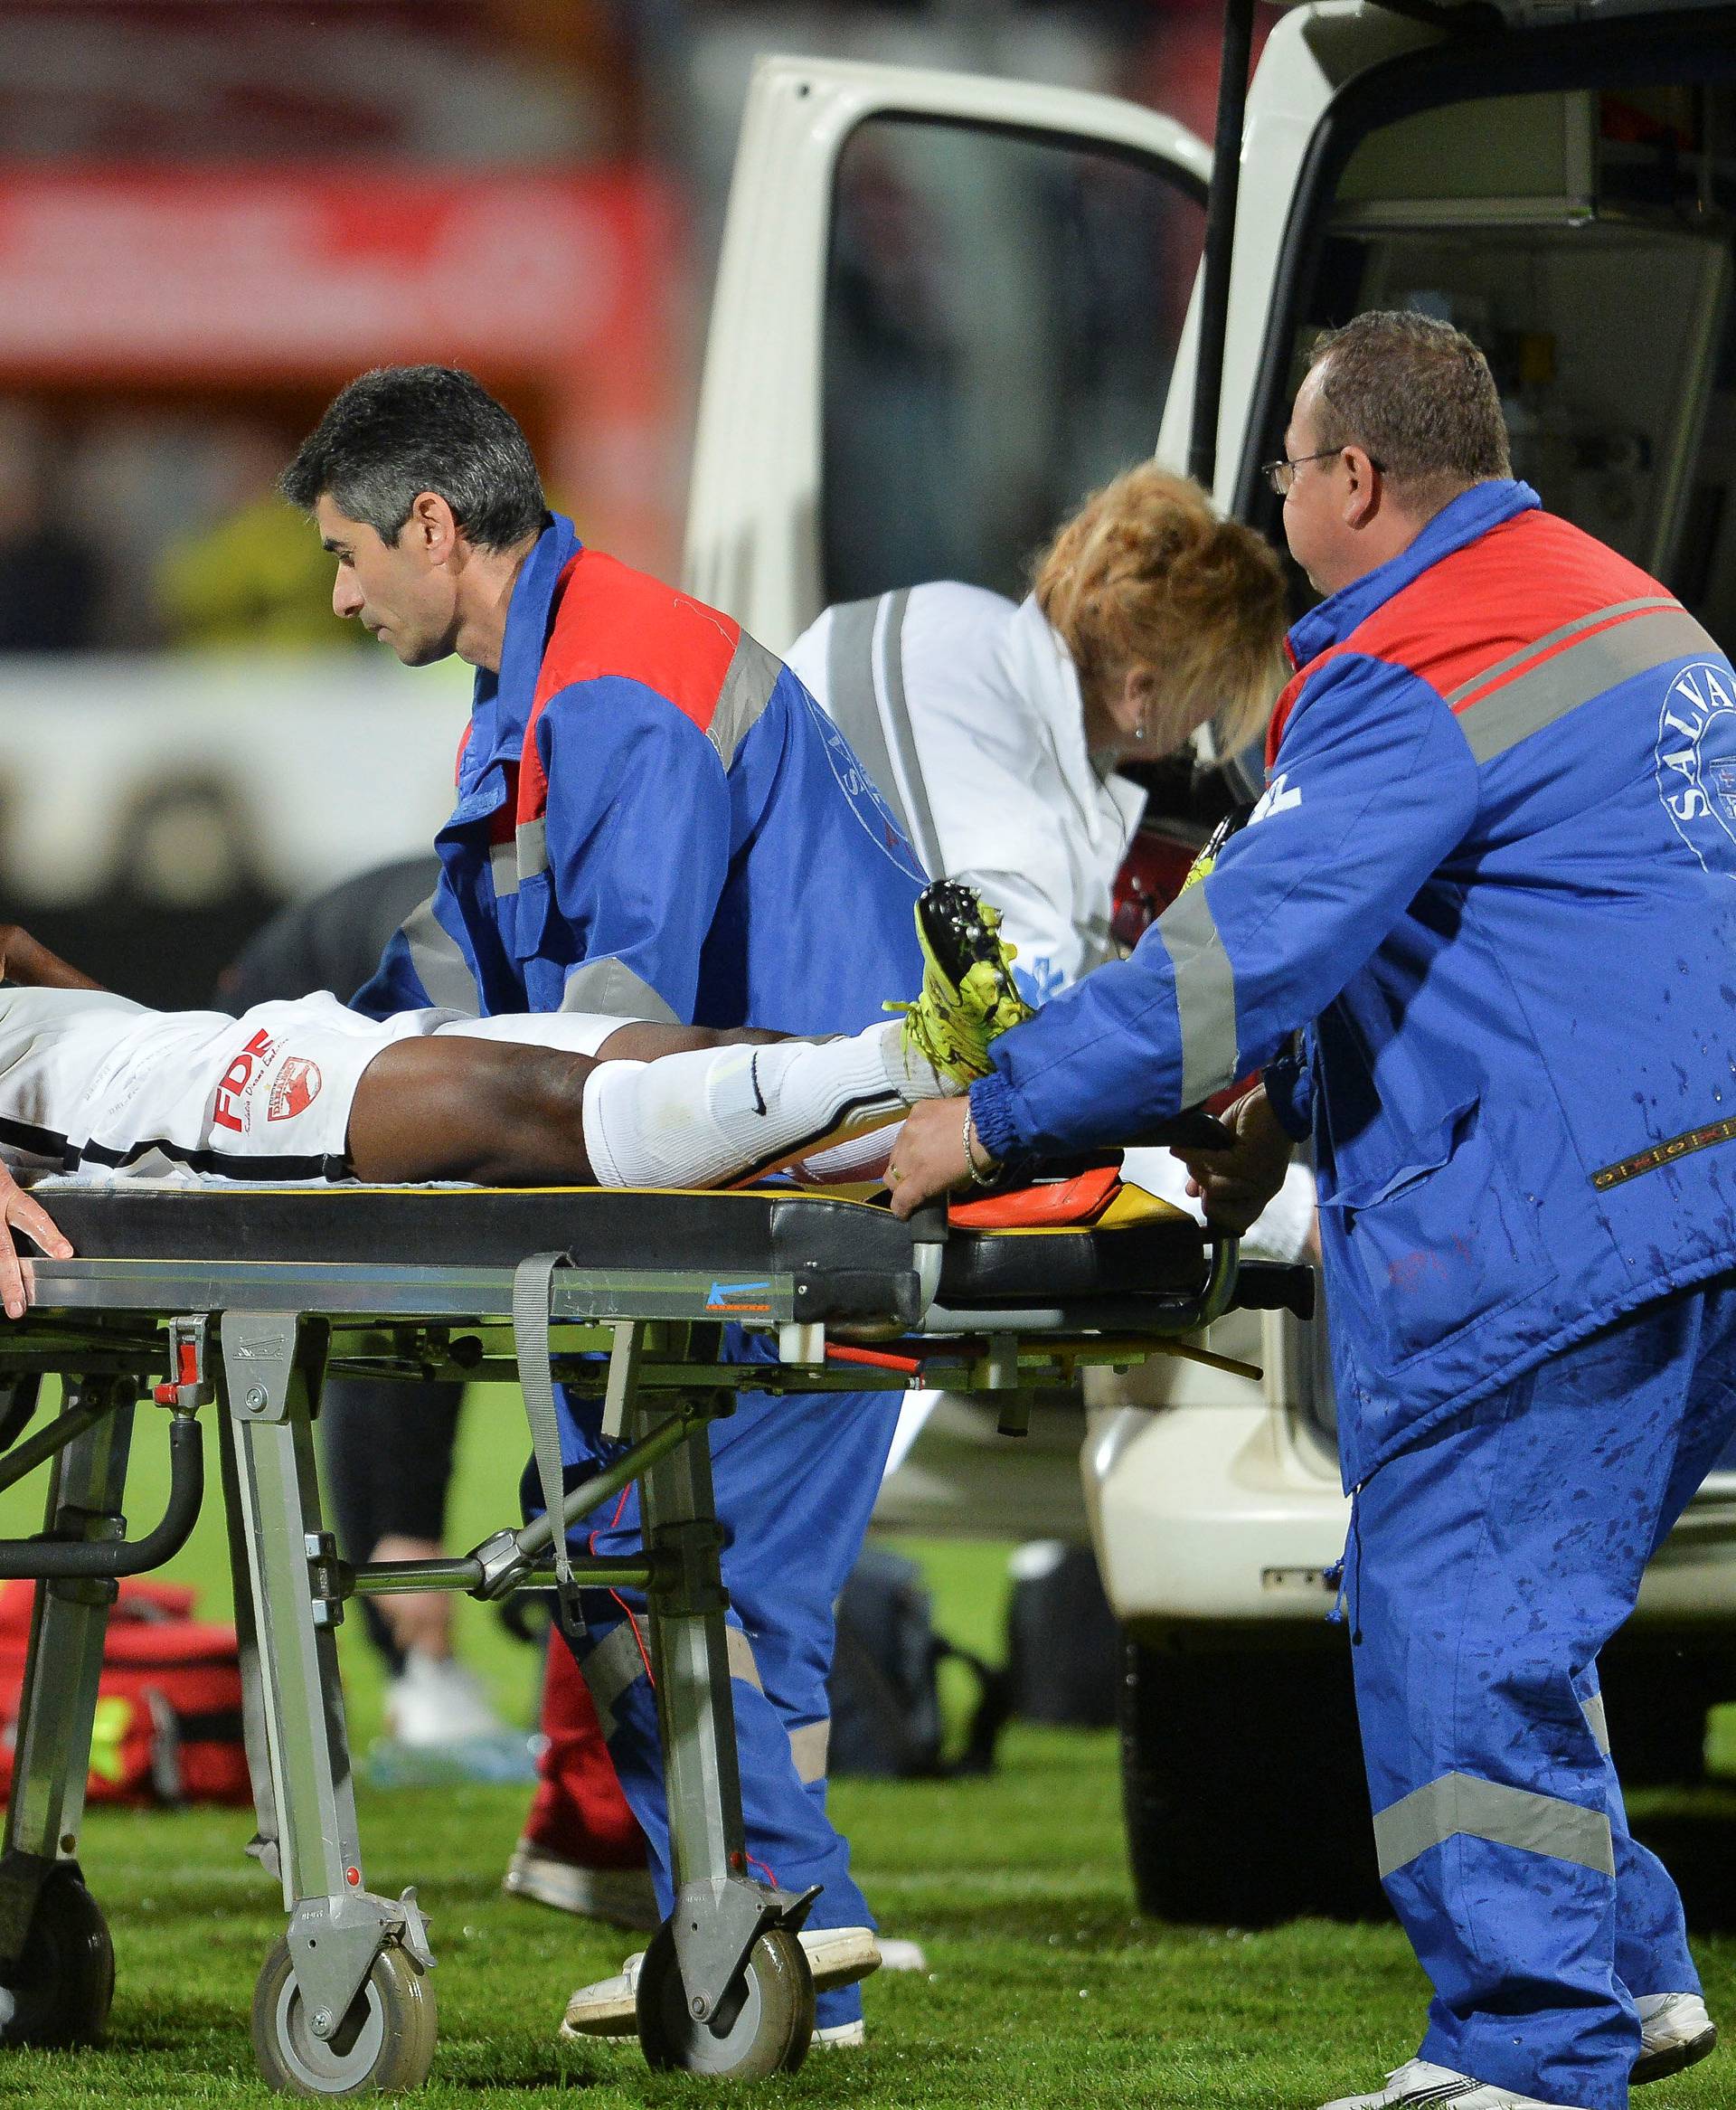 Dinamo Bucharest's Ekeng is transported to an ambulance after collapsing during a play-off match against Viitorul Constanta in Bucharest